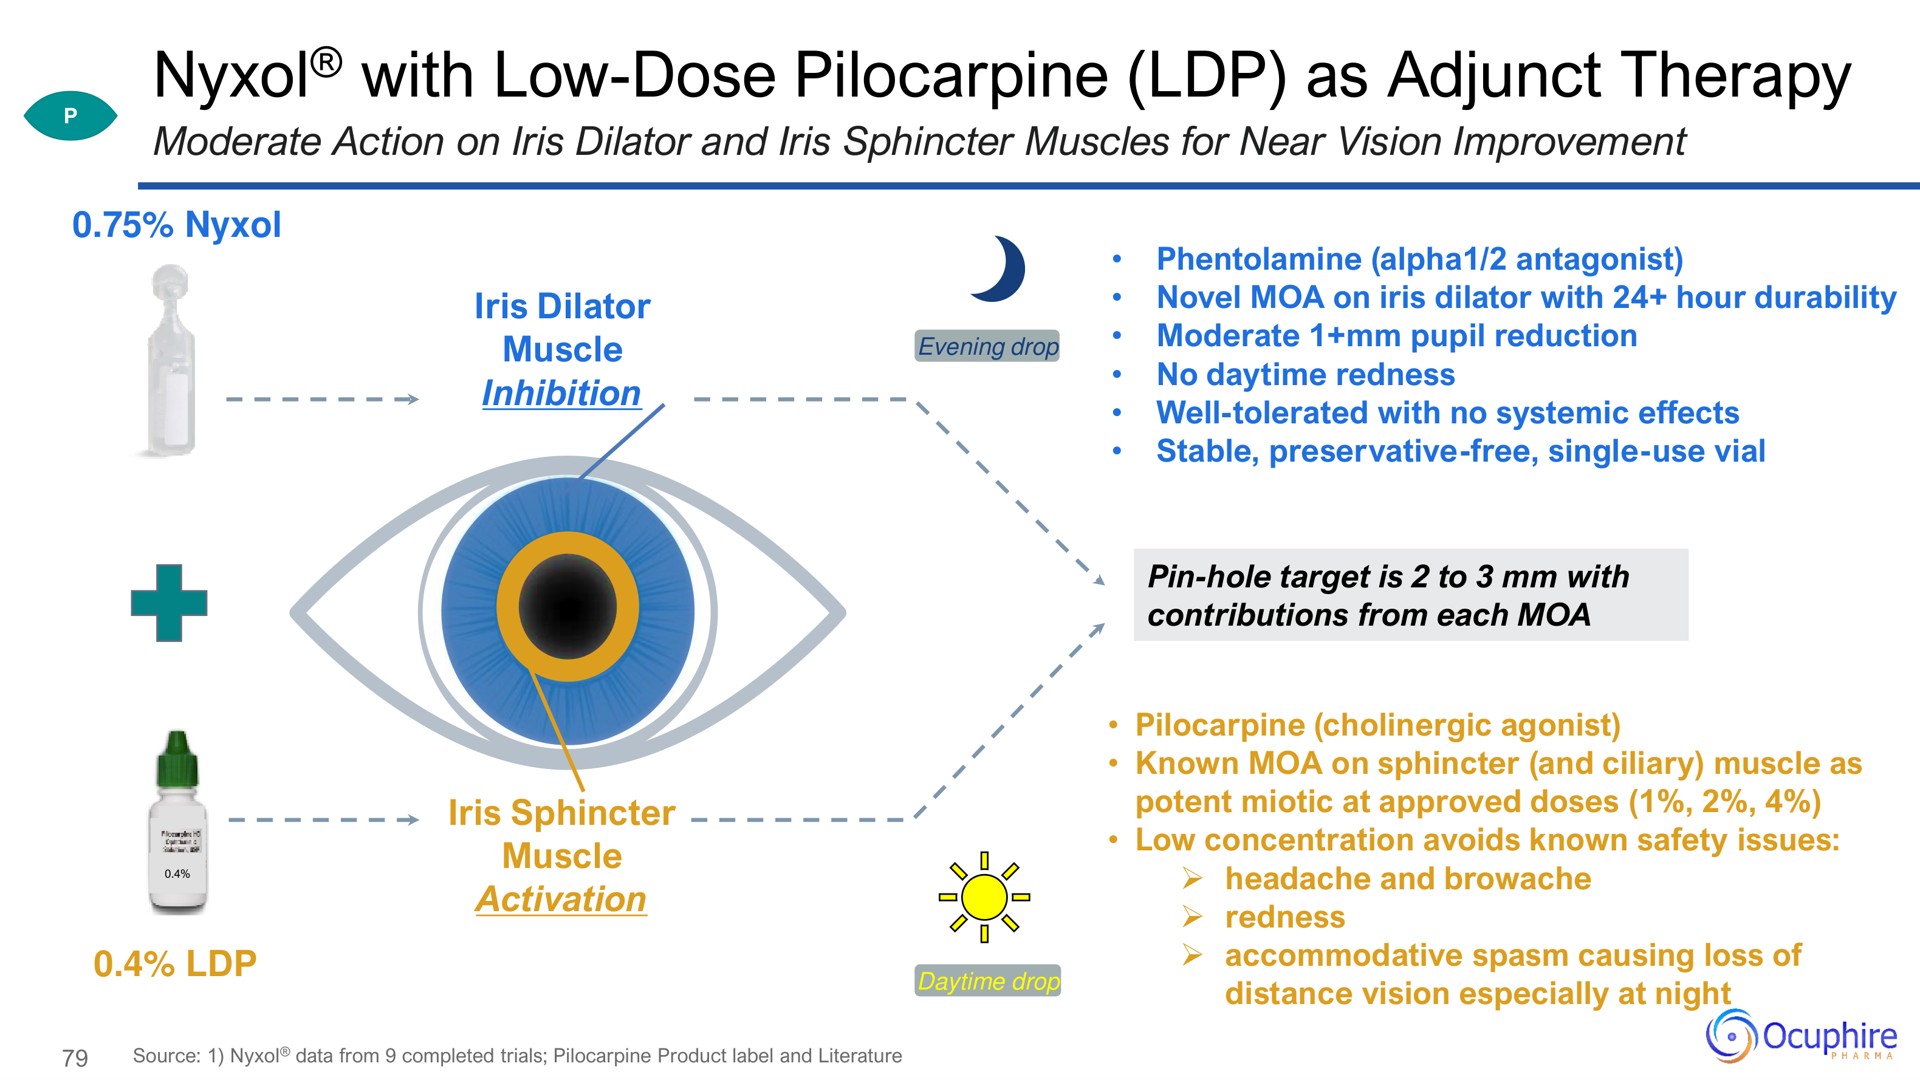 with low dose pilocarpine as adjunct therapy | Ocuphire Pharma